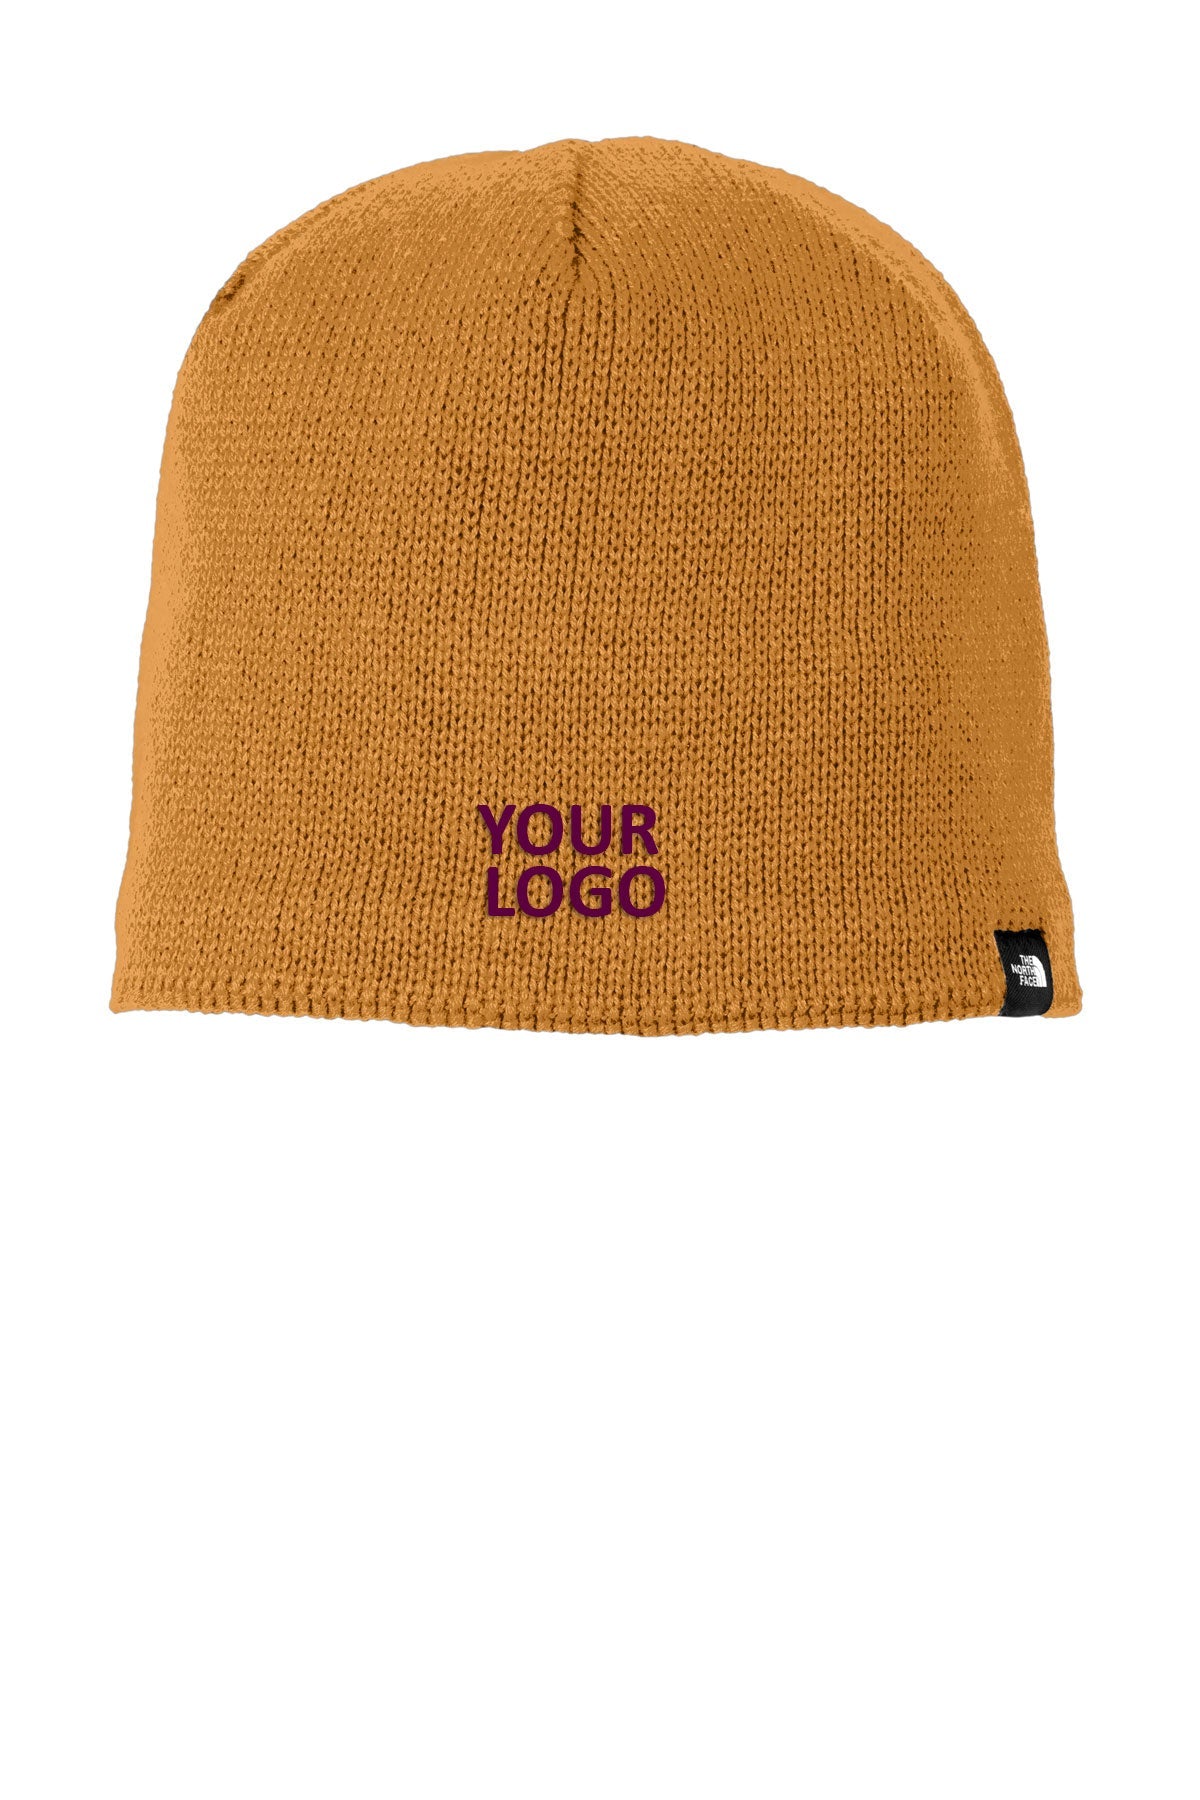 The North Face Timber Tan NF0A4VUB The-North-Face-Mountain-Beanie-NF0A4VUB-Timber-Tan